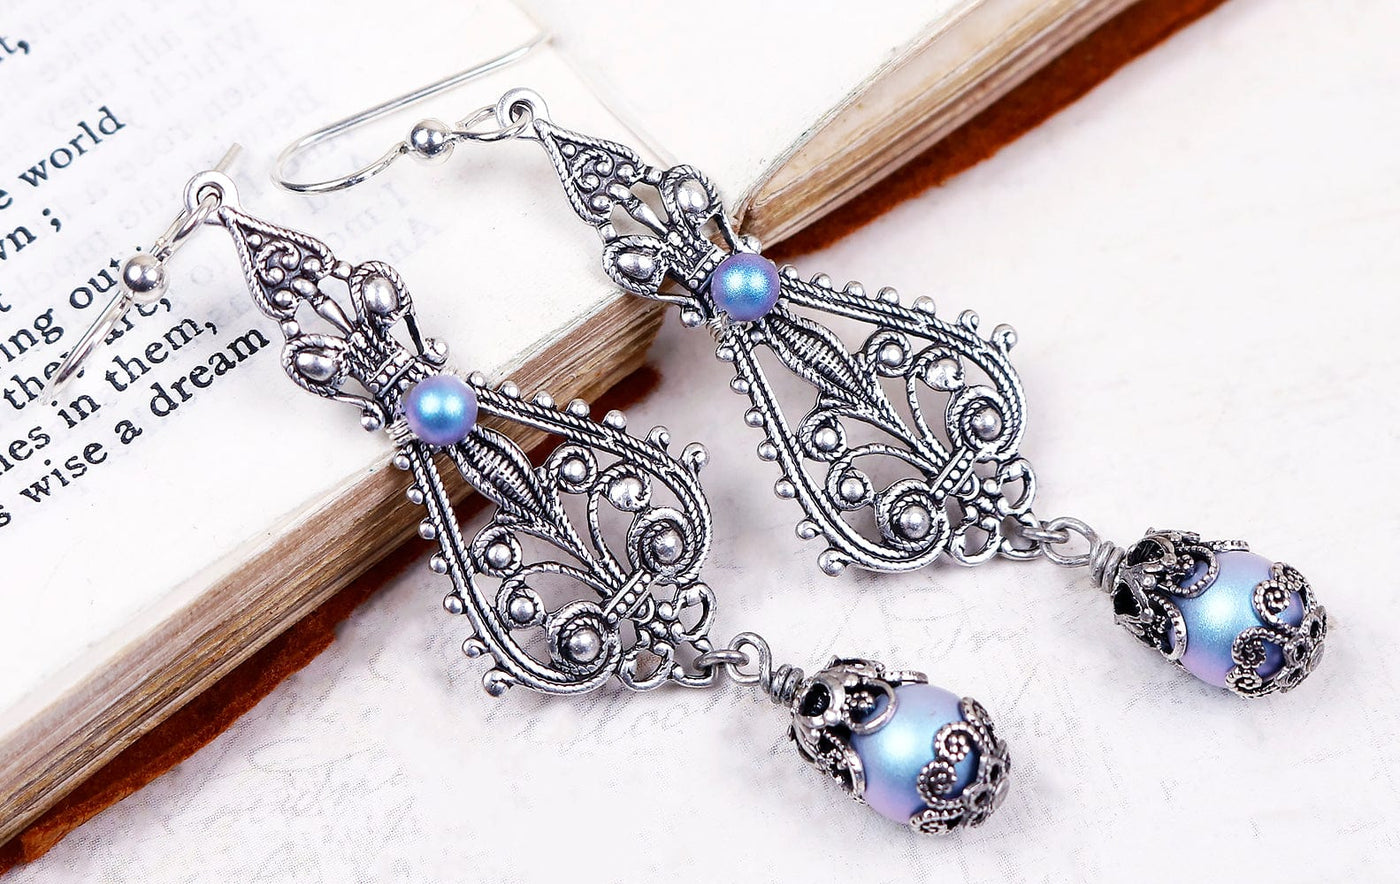 Fiora Earrings in Iridescent Light Blue Pearl and Antiqued Silver by Rabbitwood and Reason